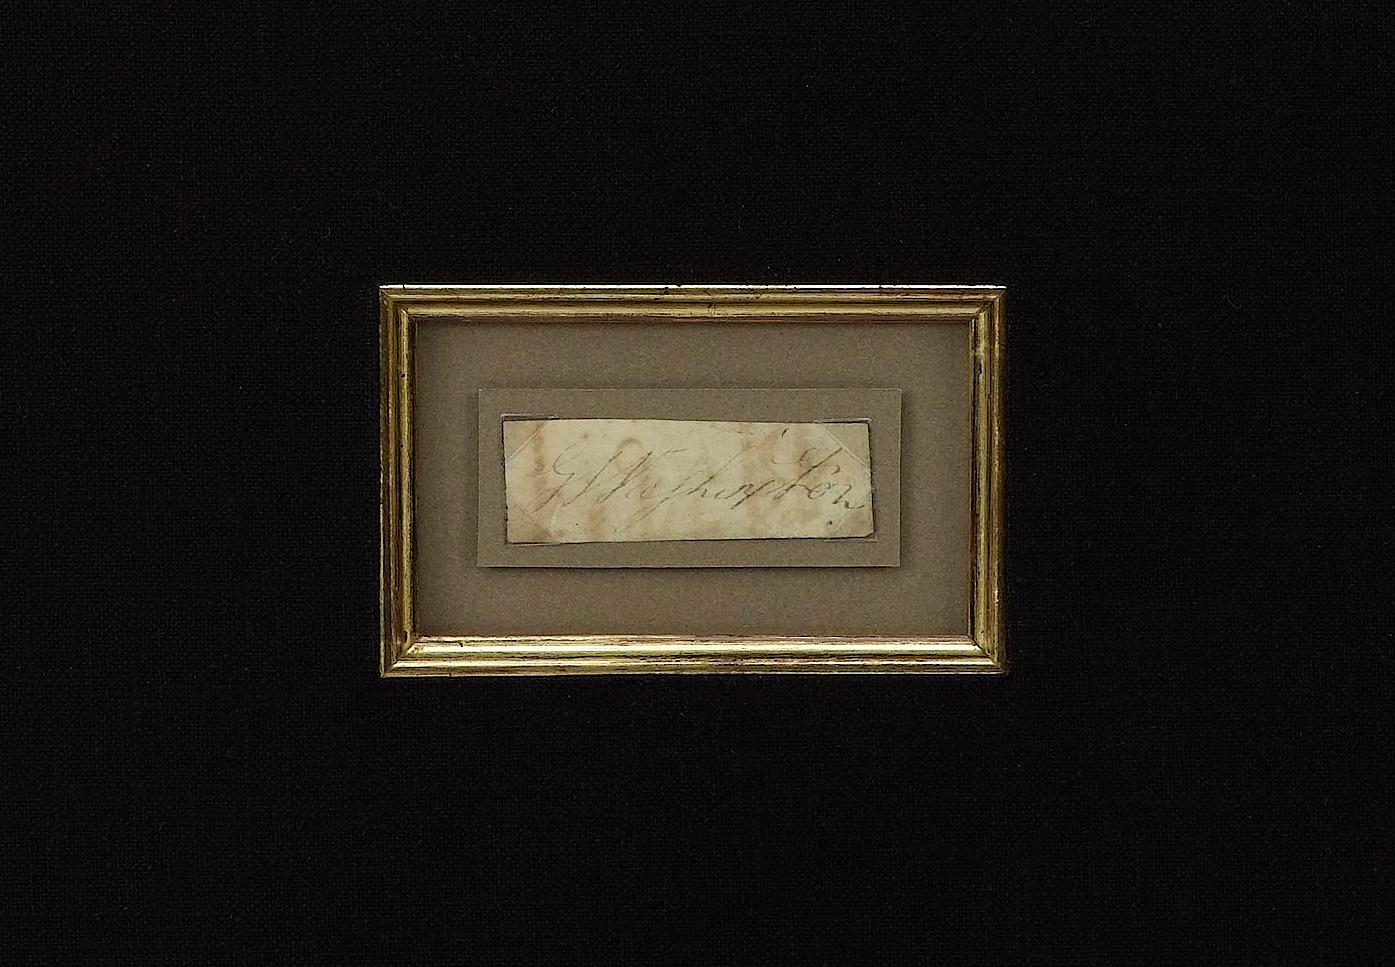 Presented is an original George Washington signature, presented framed with an oval chromolithographed portrait of George Washington printed by E. C. Middleton. The cut signature reads “G. Washington” signed in black ink. This rare George Washington